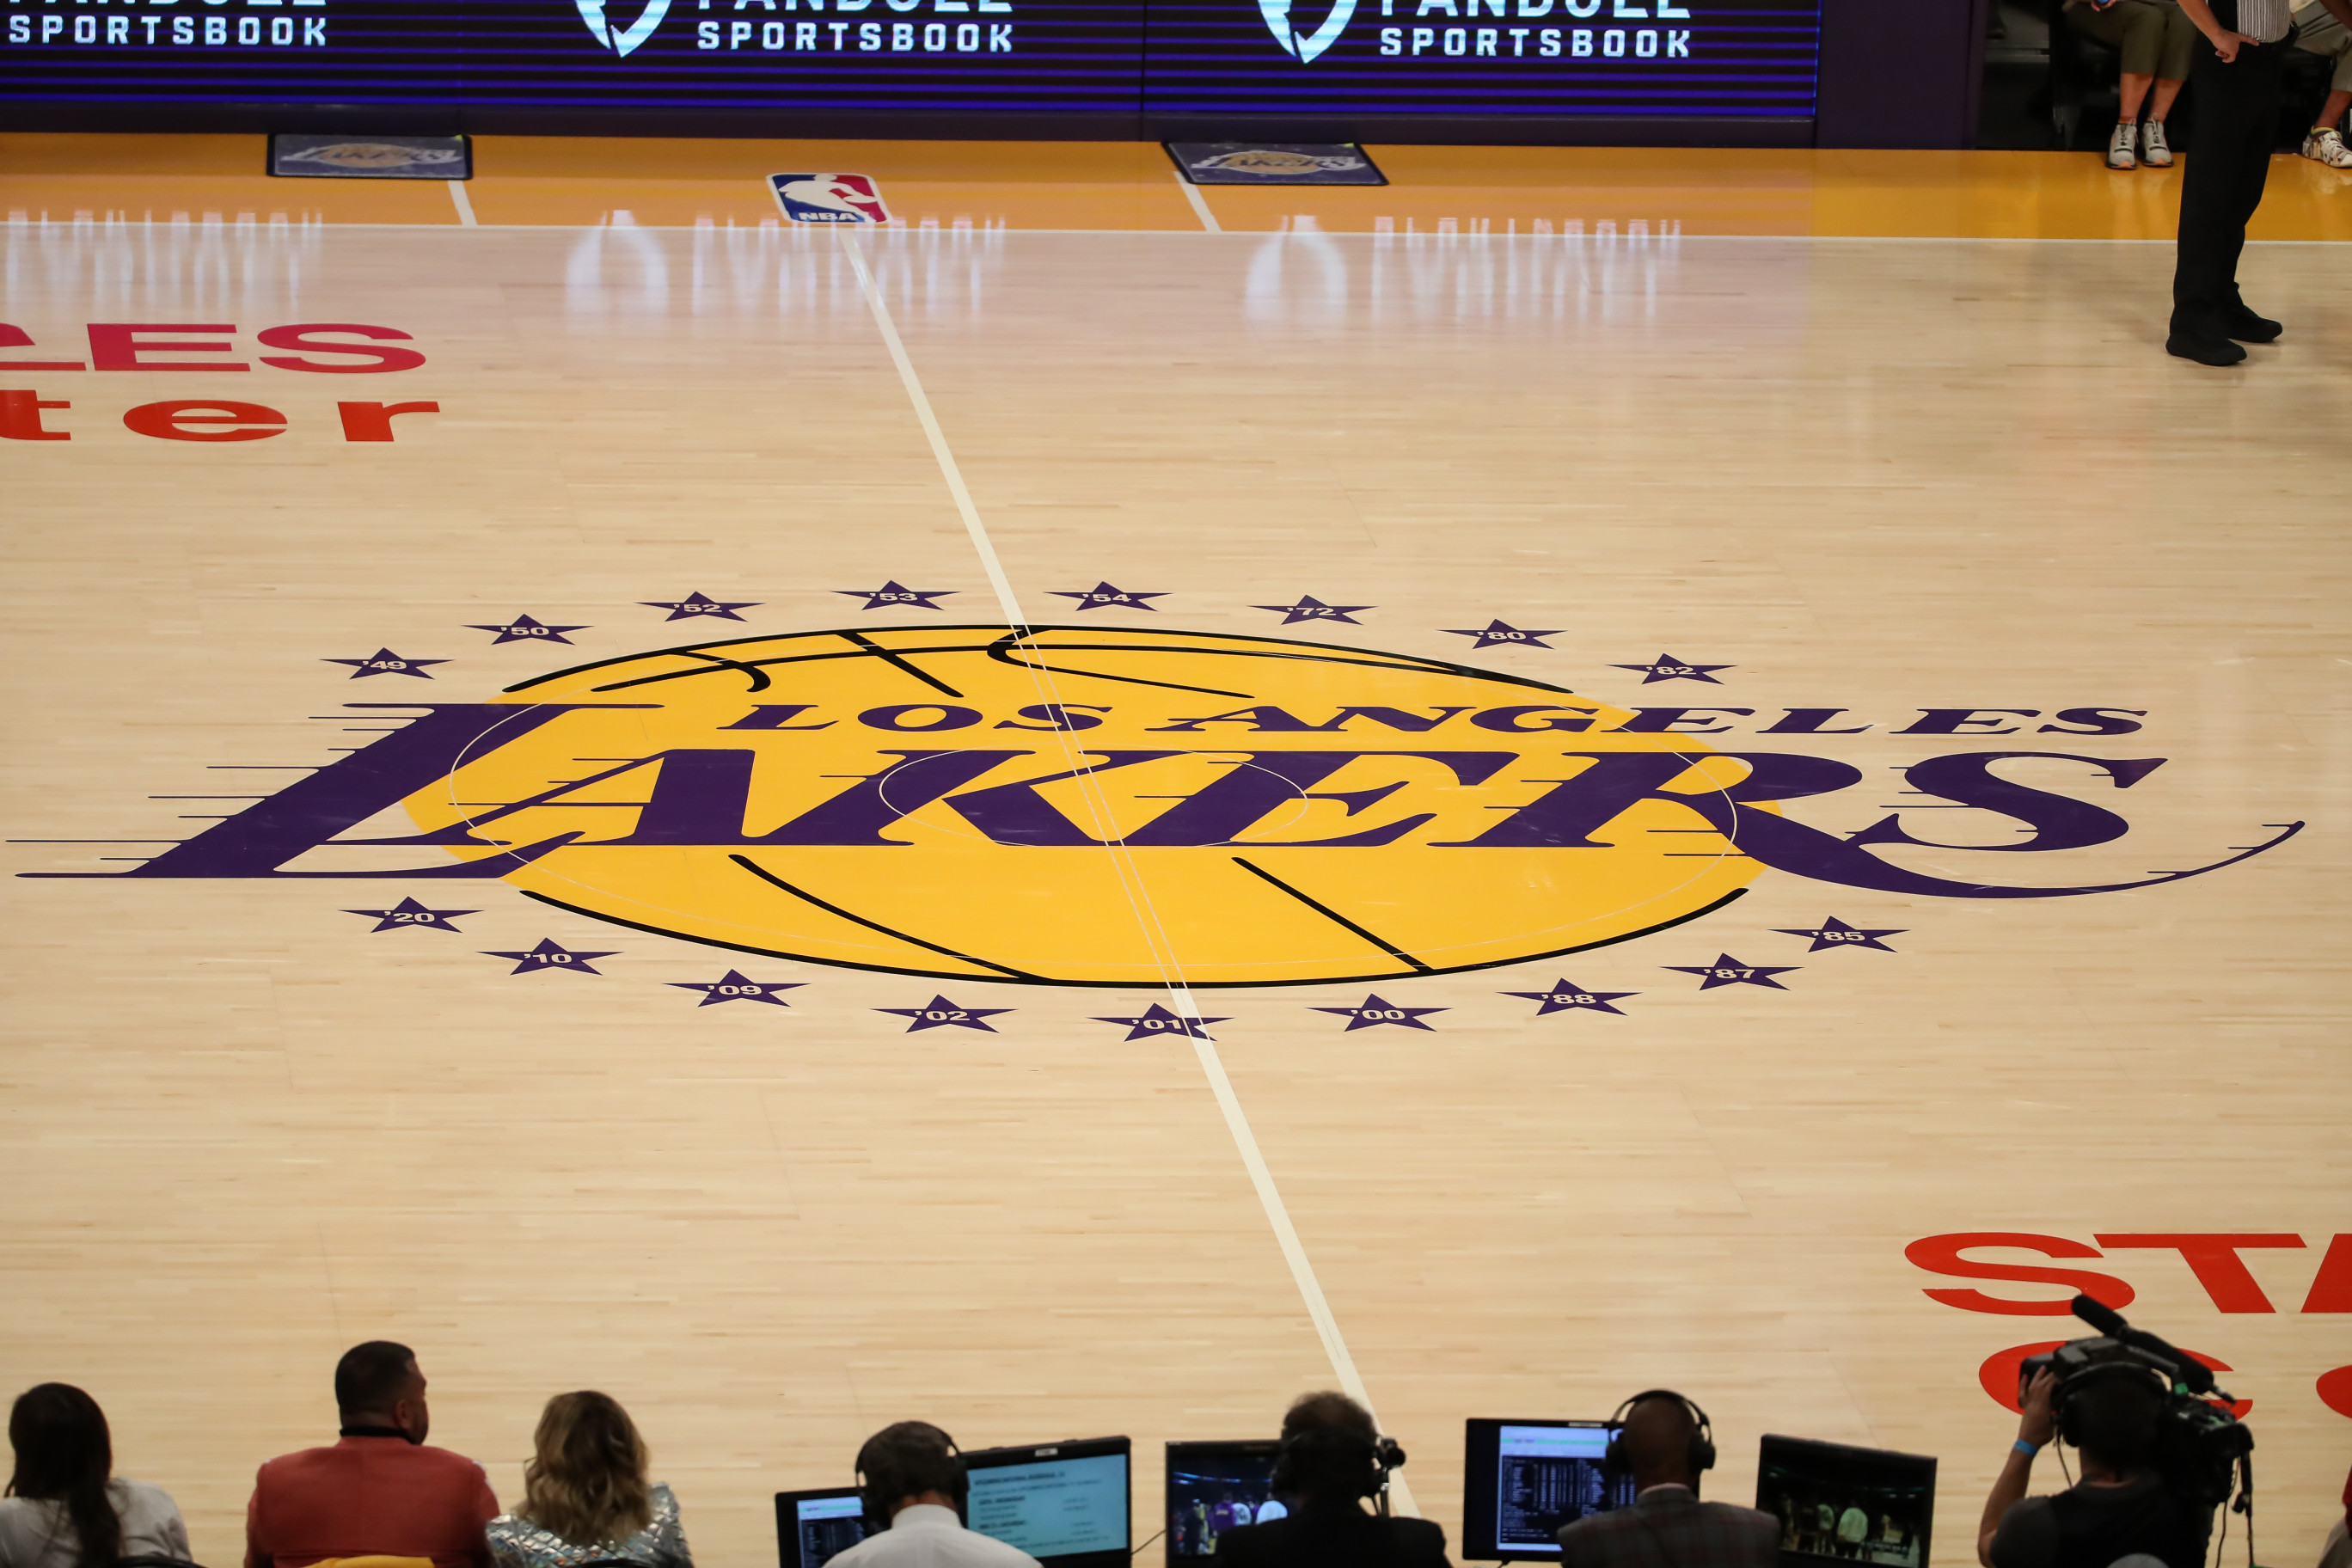 Lakers Rumors: LA Will 'Aggressively' Try to Trade into 2nd Round